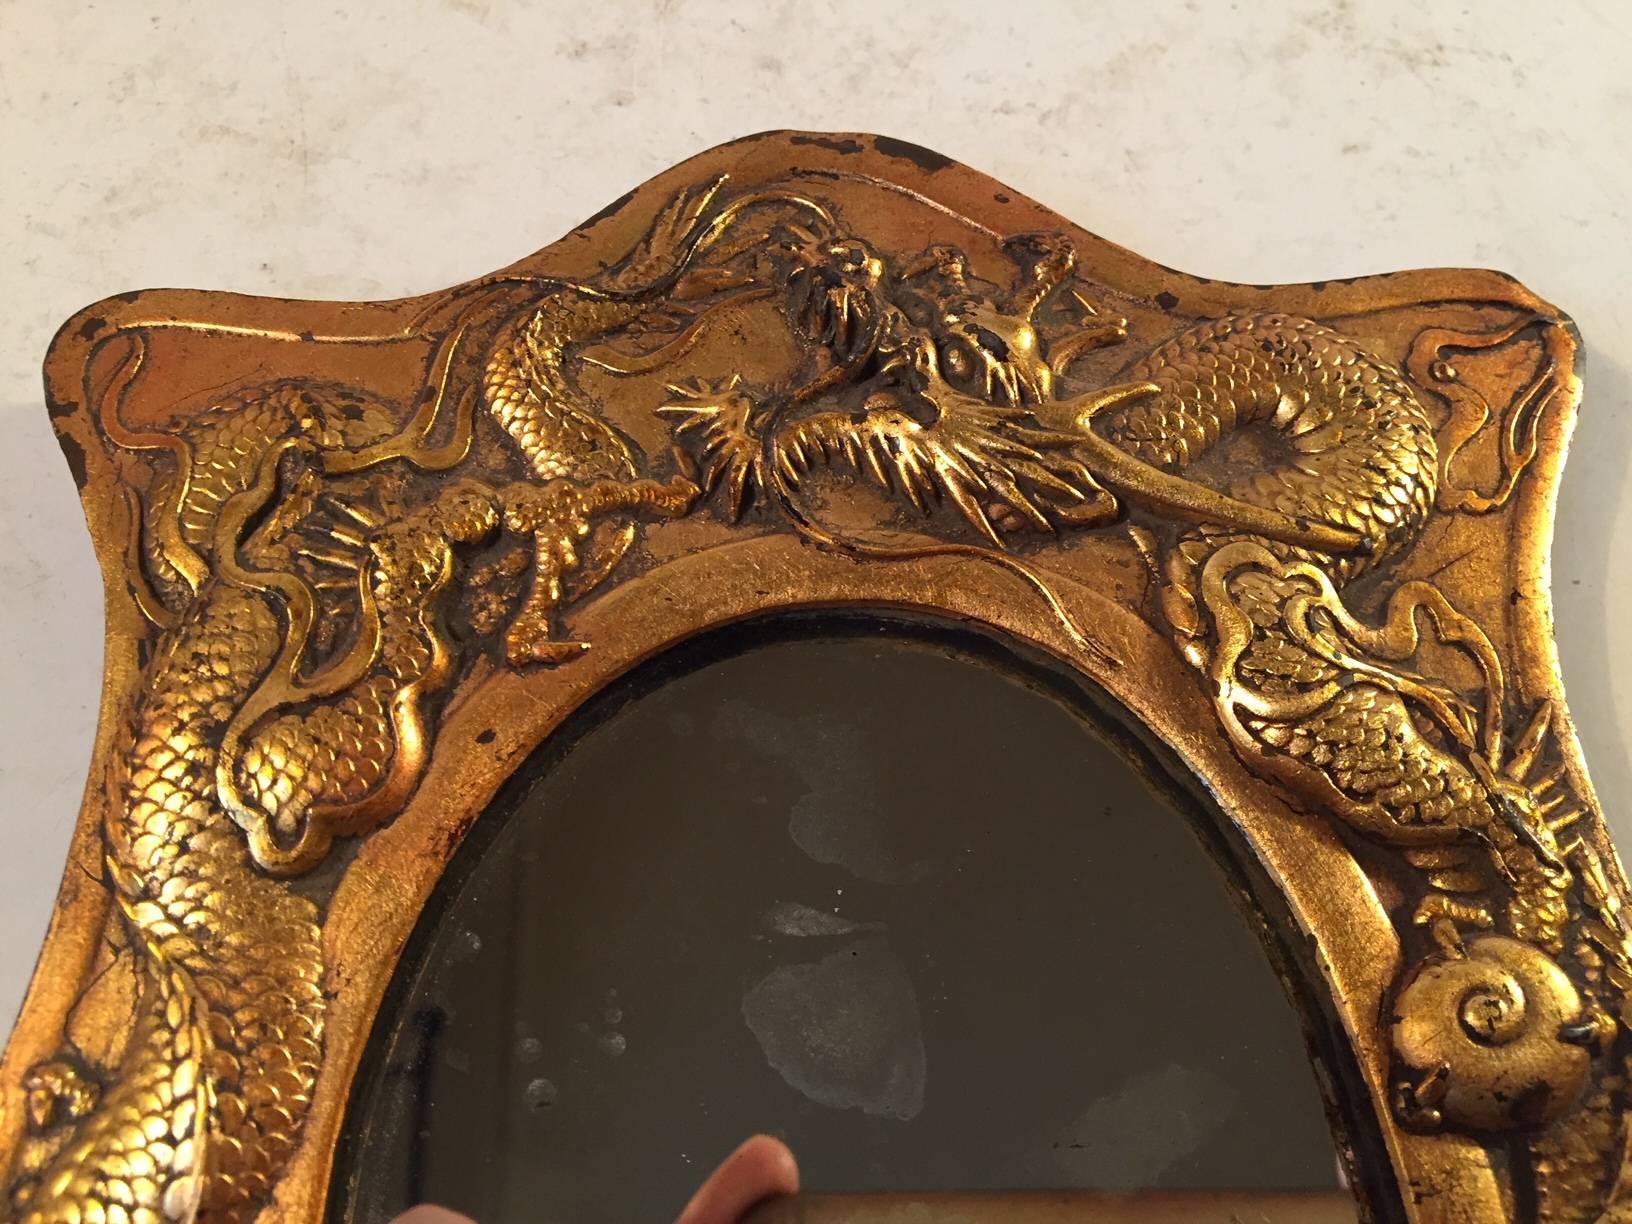 A very detailed bronze mirror with raised motifs of dragons to the frame. It is a small mirror suited for make-up or decoration. It was manufactured in Japan between 1870-1900 and it was probably intended as a picture/photo frame. The measurements